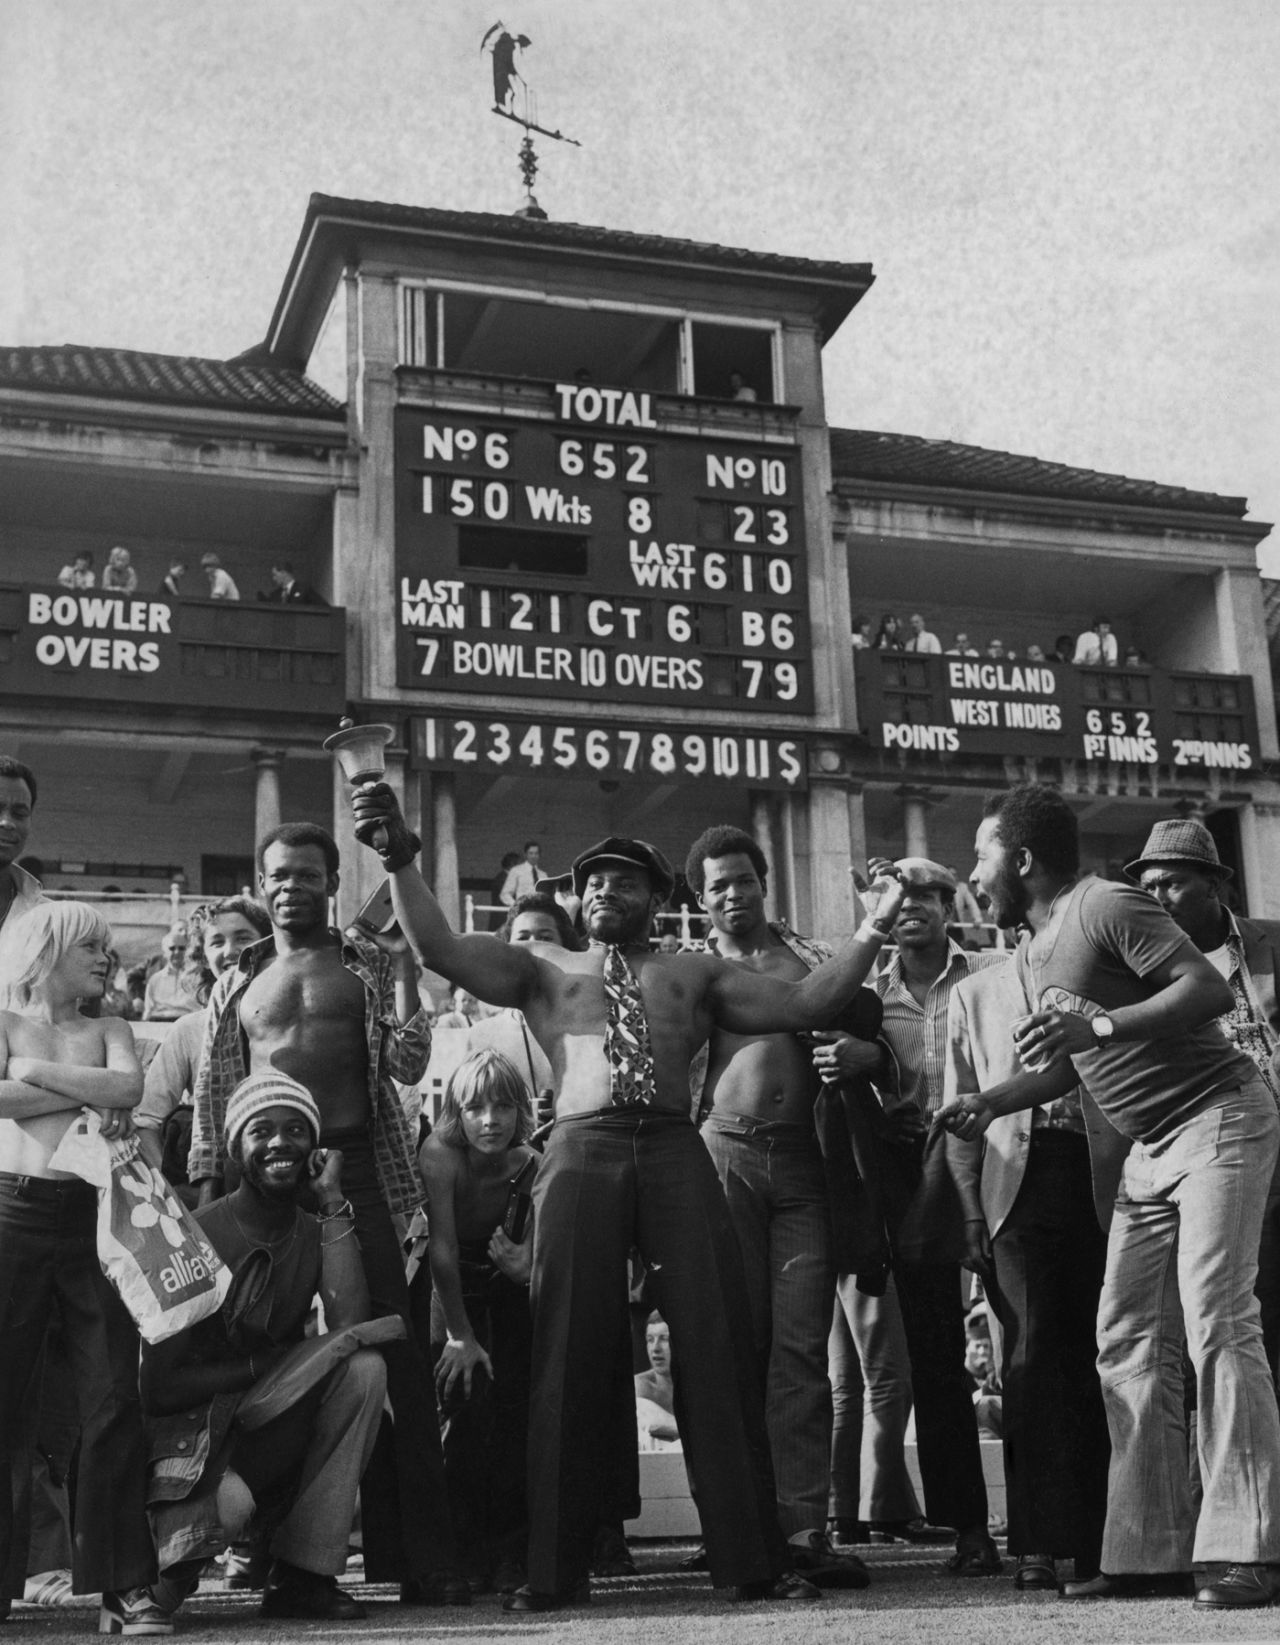 West Indies fans celebrate, day two, England v West Indies, third Test, Lord's, 24 August 1973 

